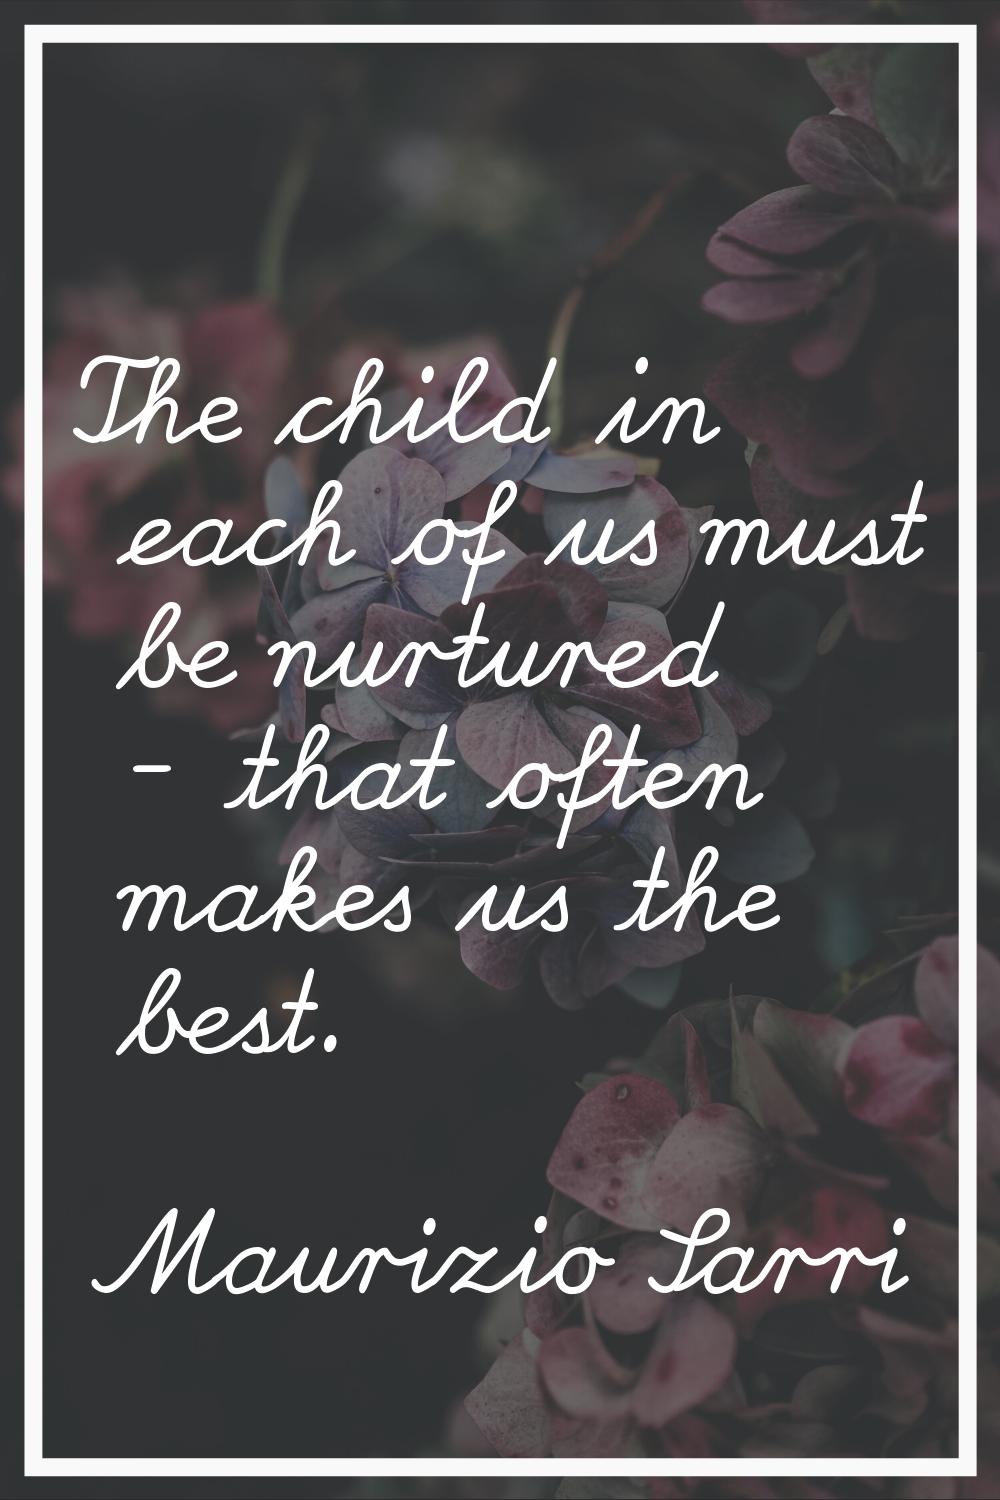 The child in each of us must be nurtured - that often makes us the best.